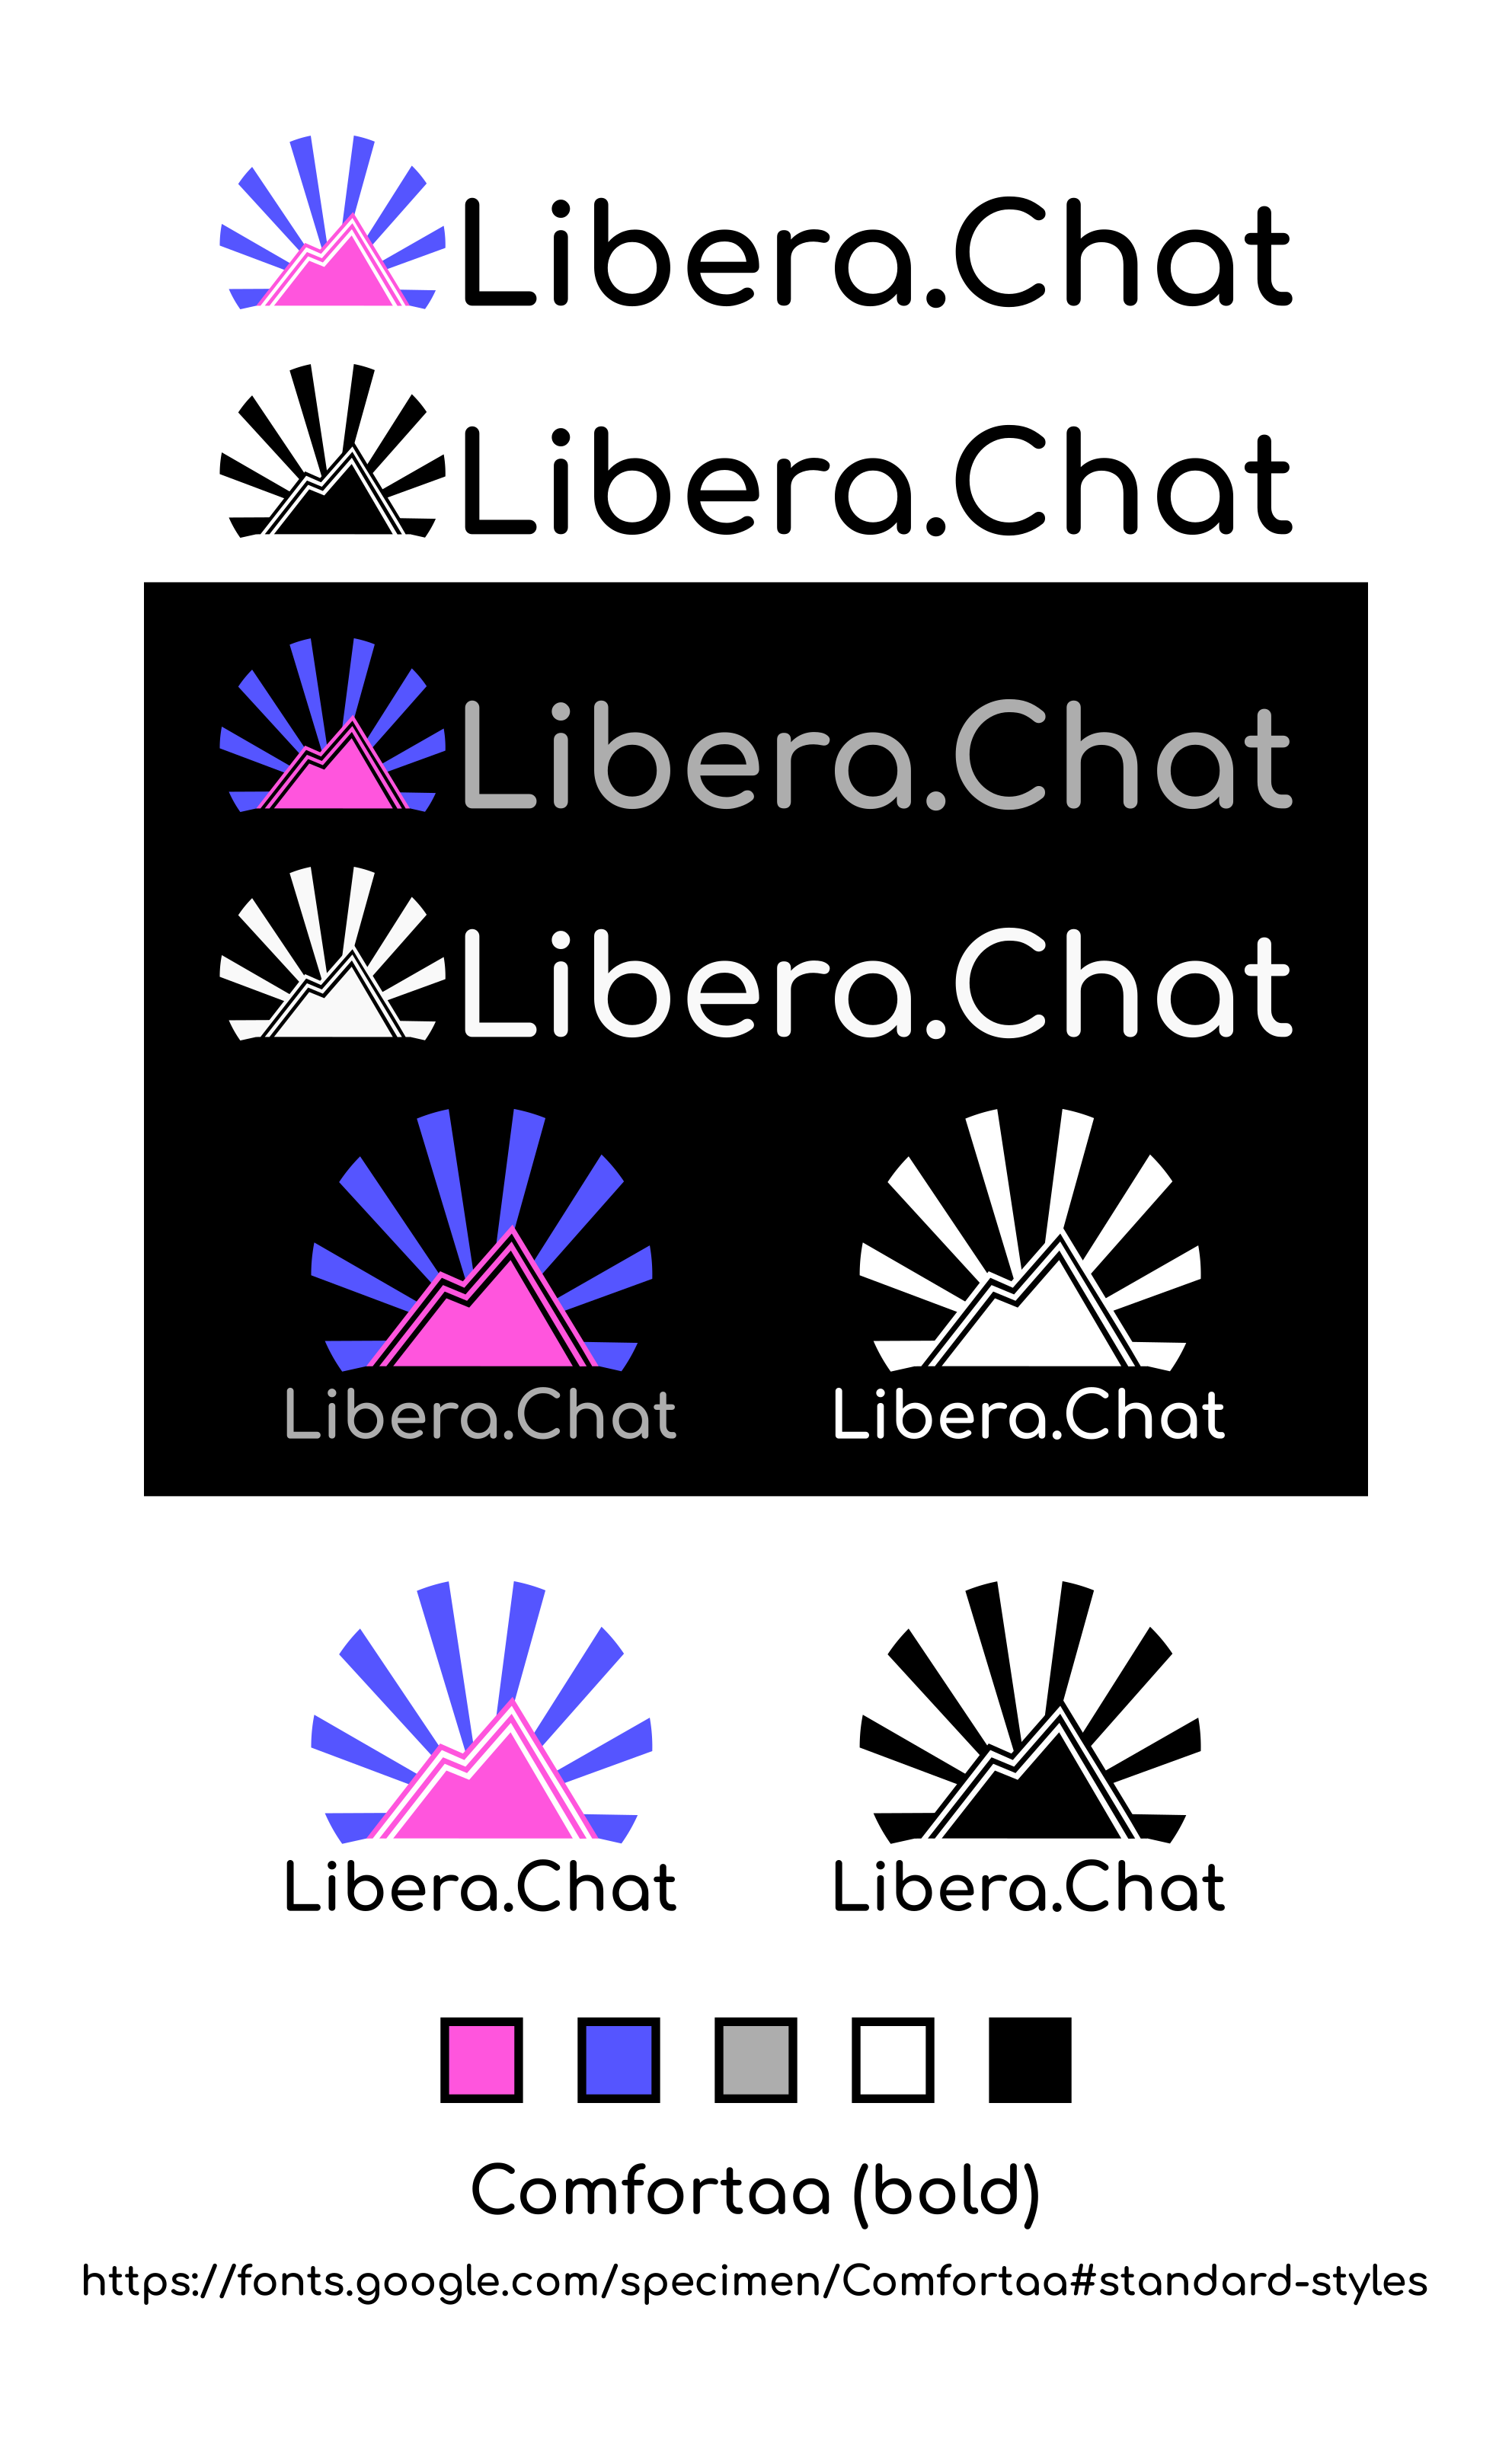 Branding for the Libera.Chat IRC network; A vaporwave-ish logo of pink mountains with purple rays.